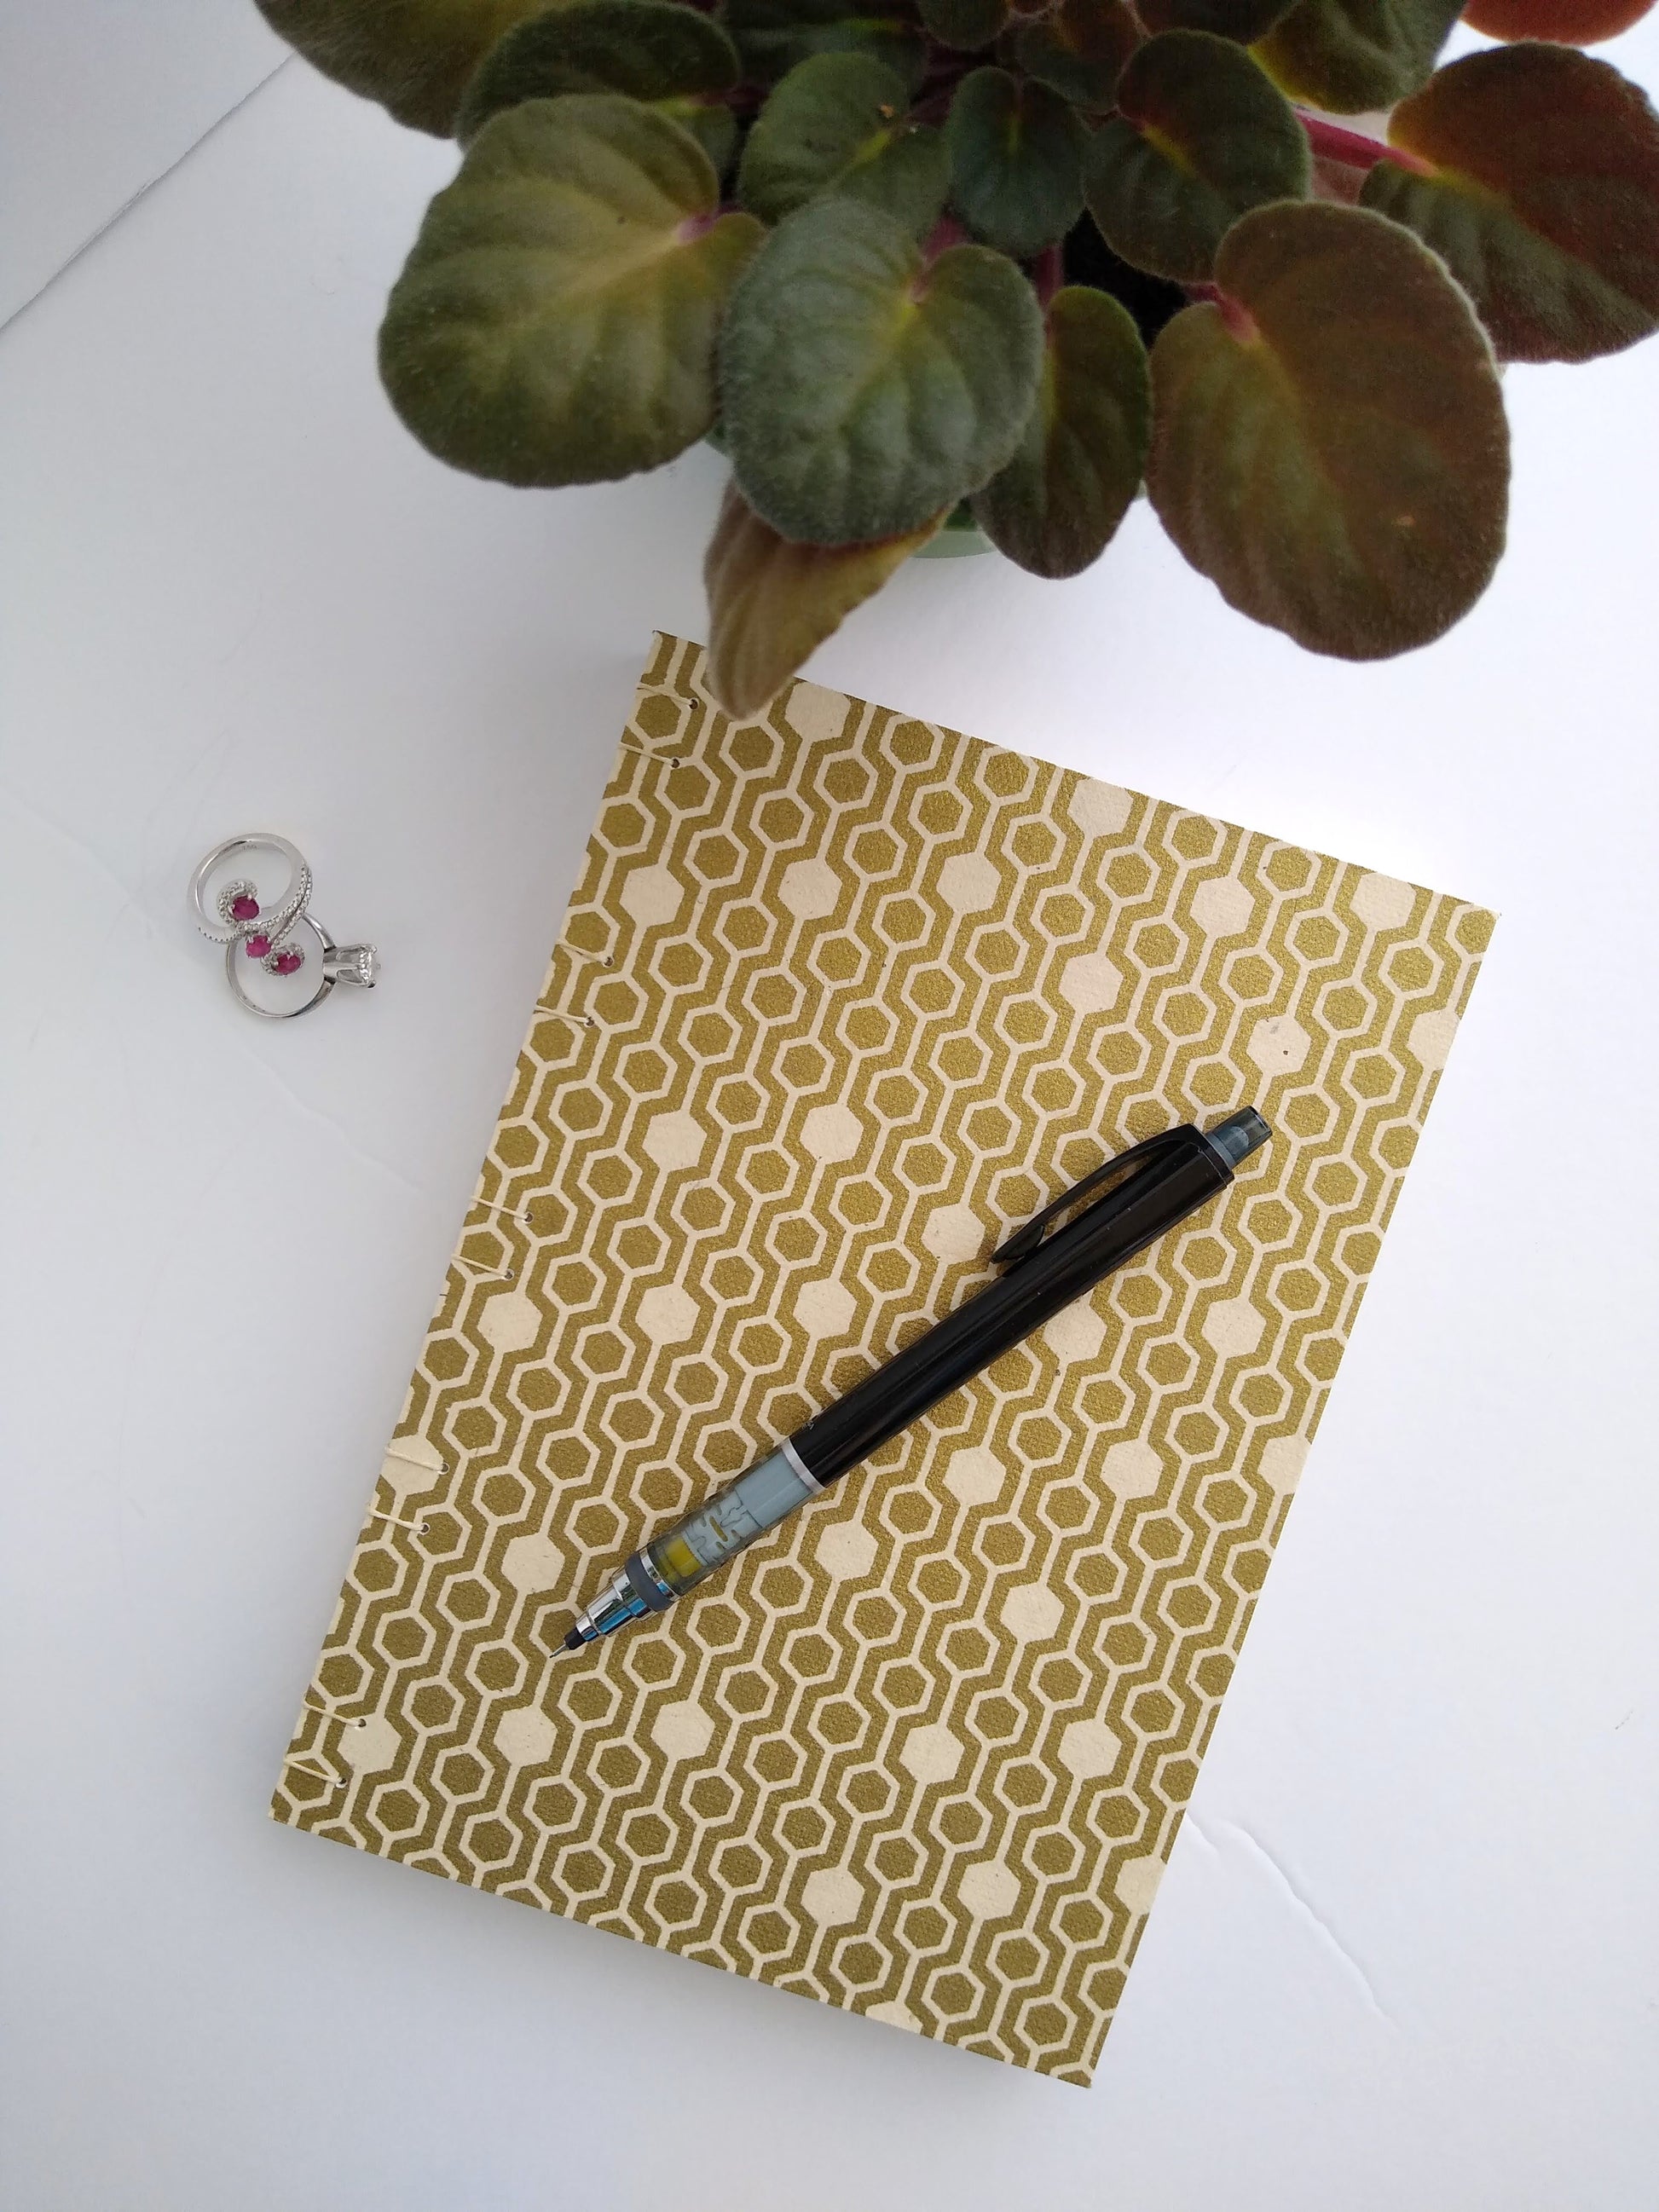 A handmade journal laying on a white desk beside a potted plant and a set of rings. A black mechanical pencil rests on top. The cover of the journal is cream with gold hexagons.